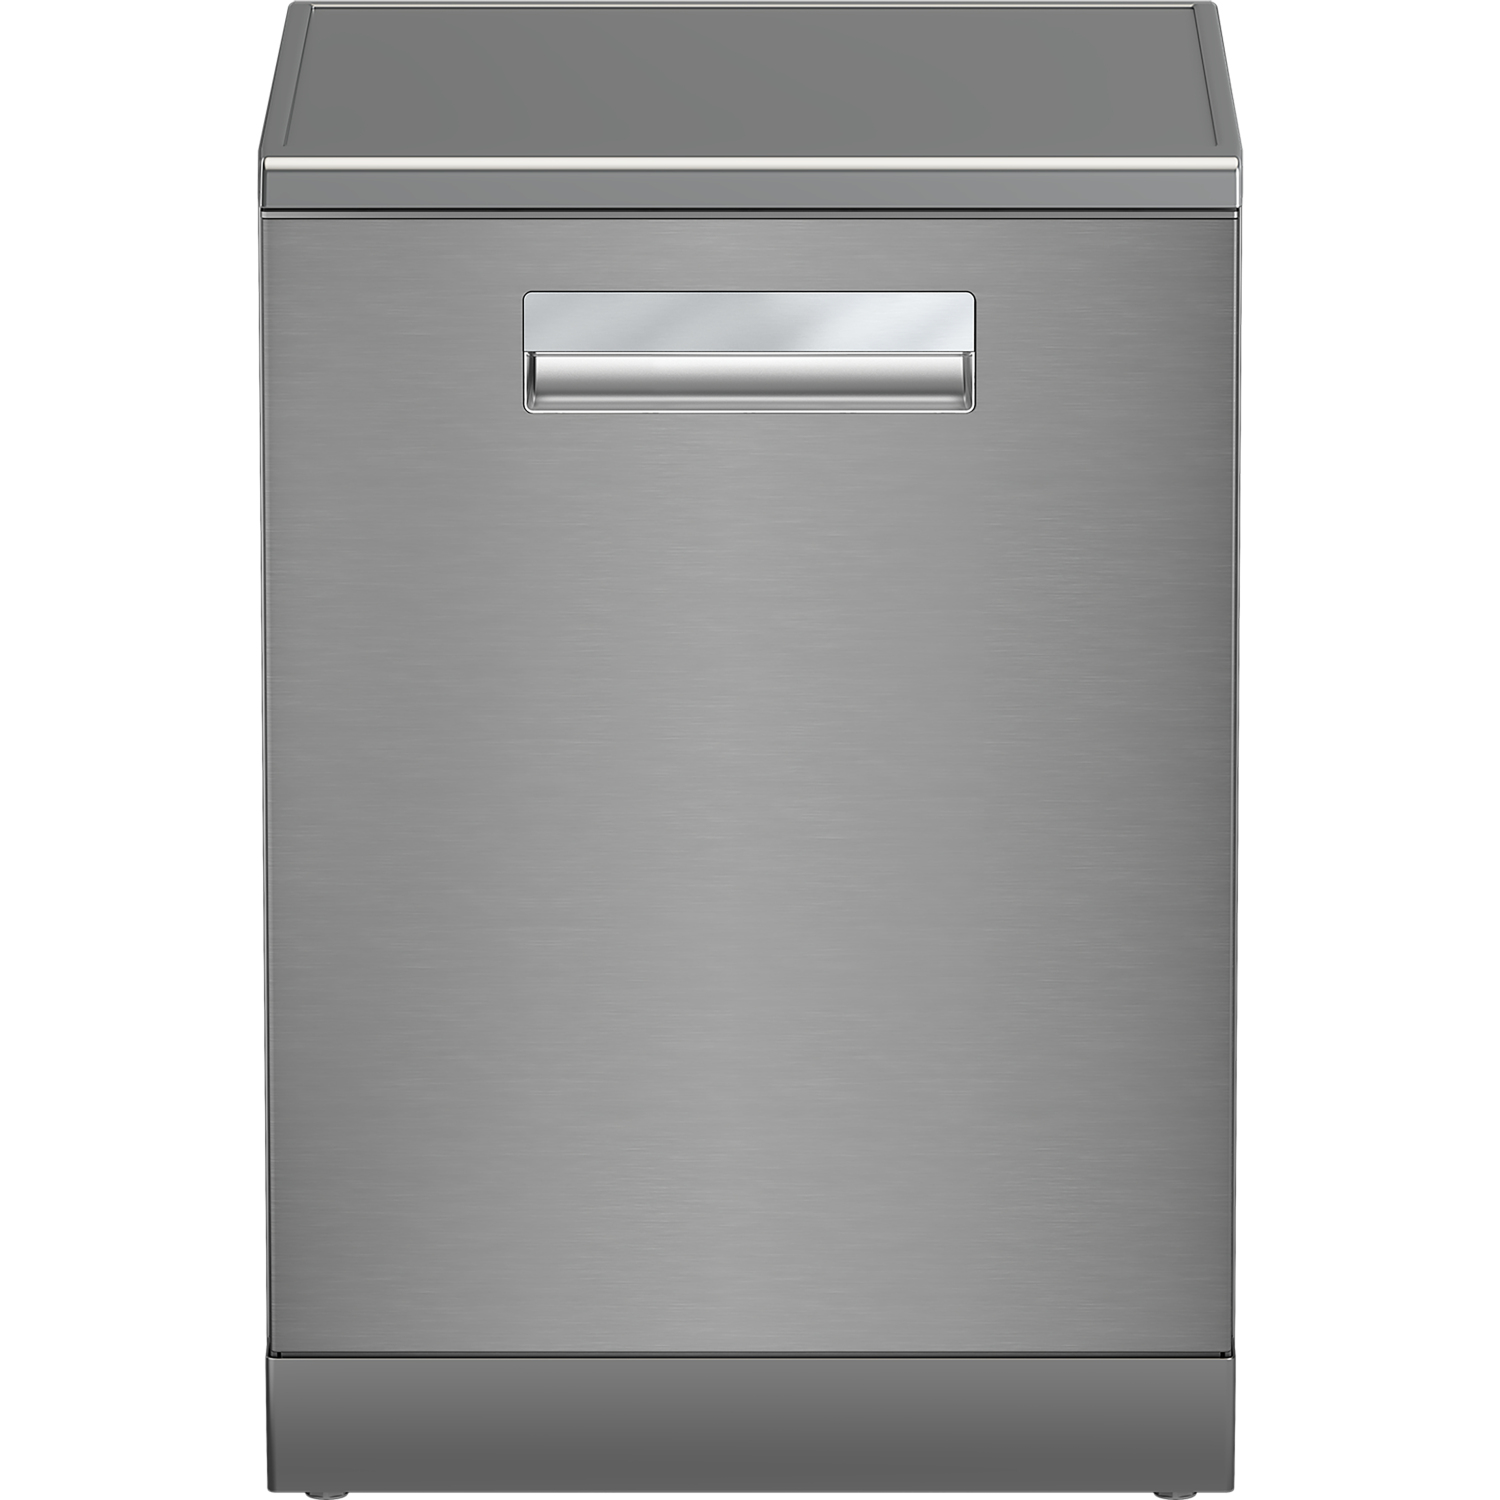 Blomberg LDF63440X Full Size Dishwasher - Stainless Steel - 16 Place Settings - 0